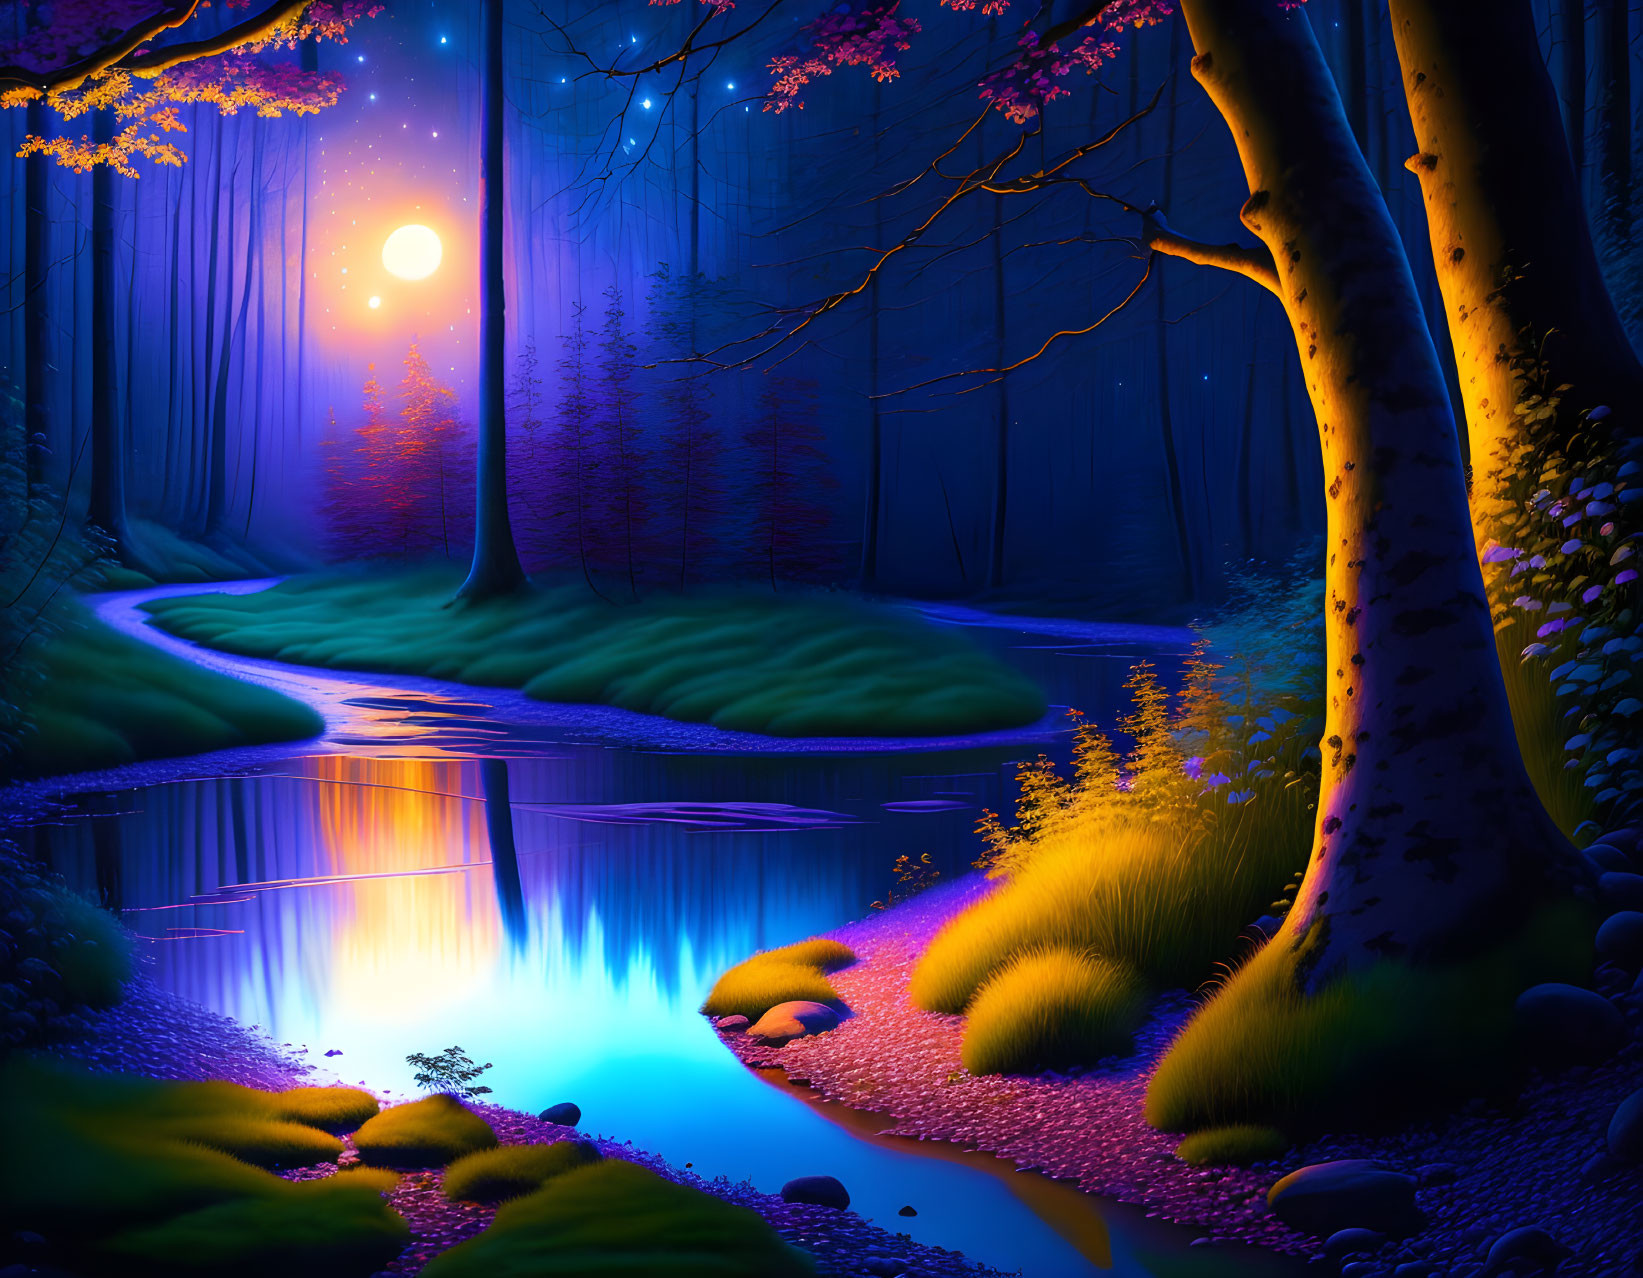 Digital Artwork: Mystical Forest Night Scene with Glowing Trees